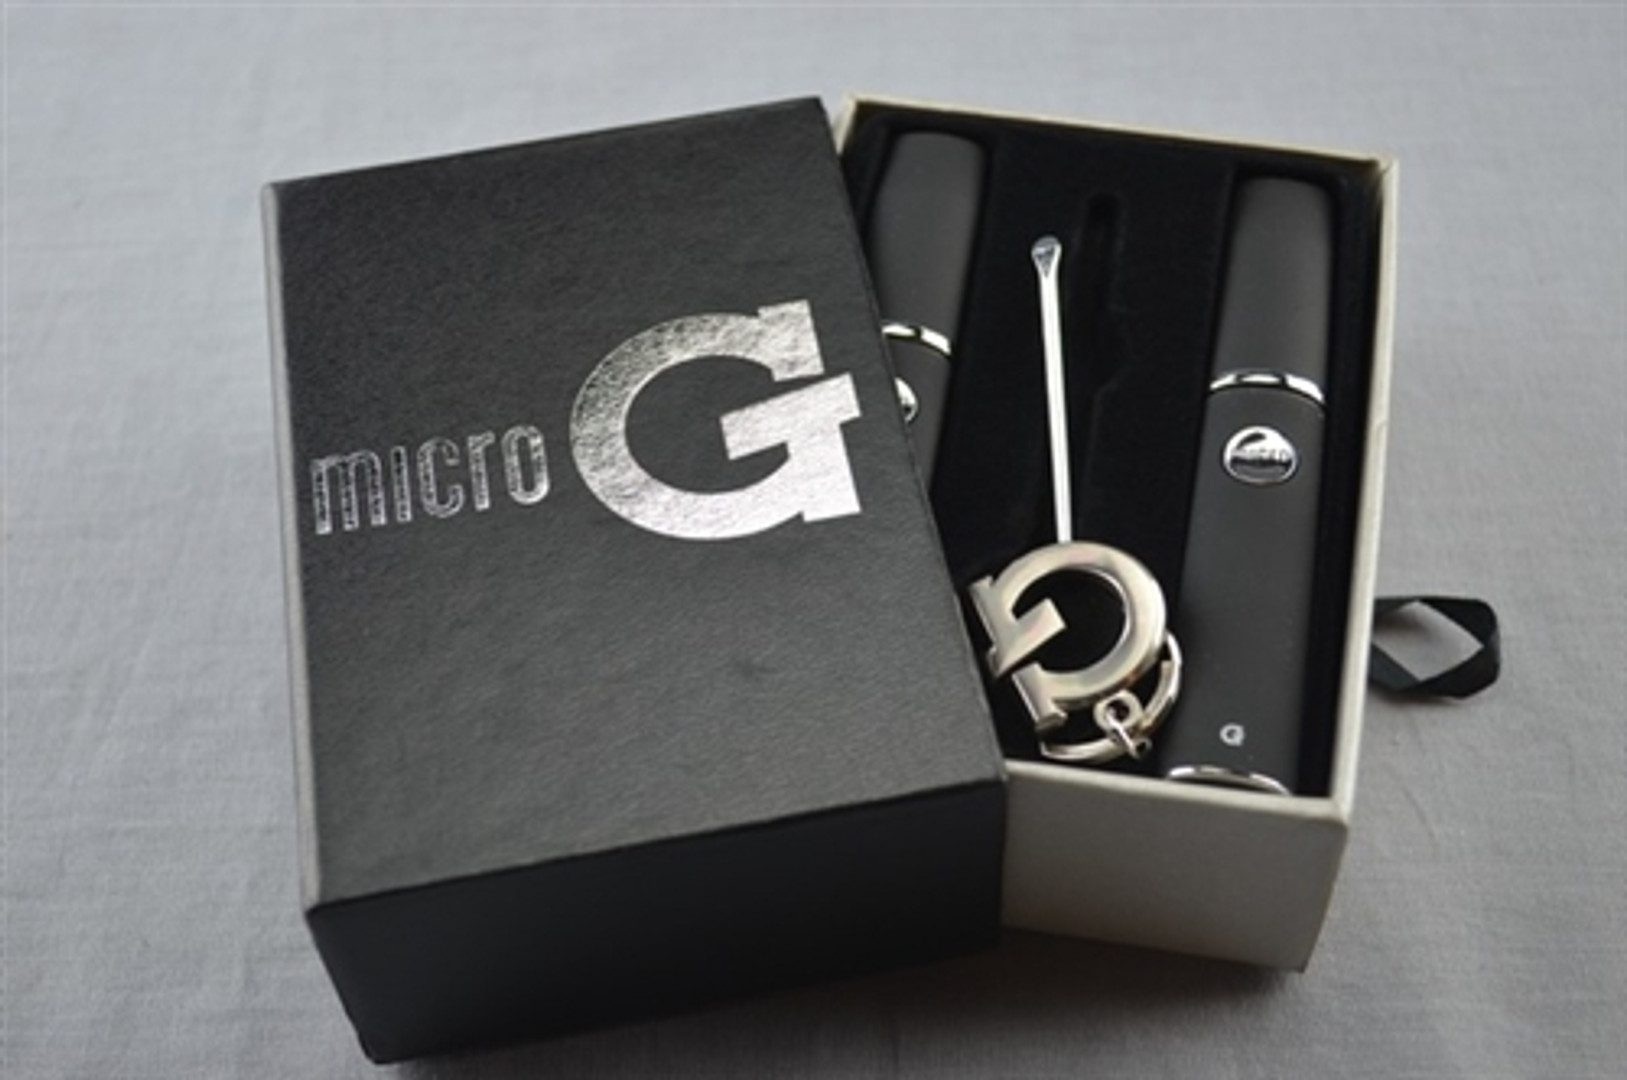 microG Pen Vaporizer from Grenco Science (Review)